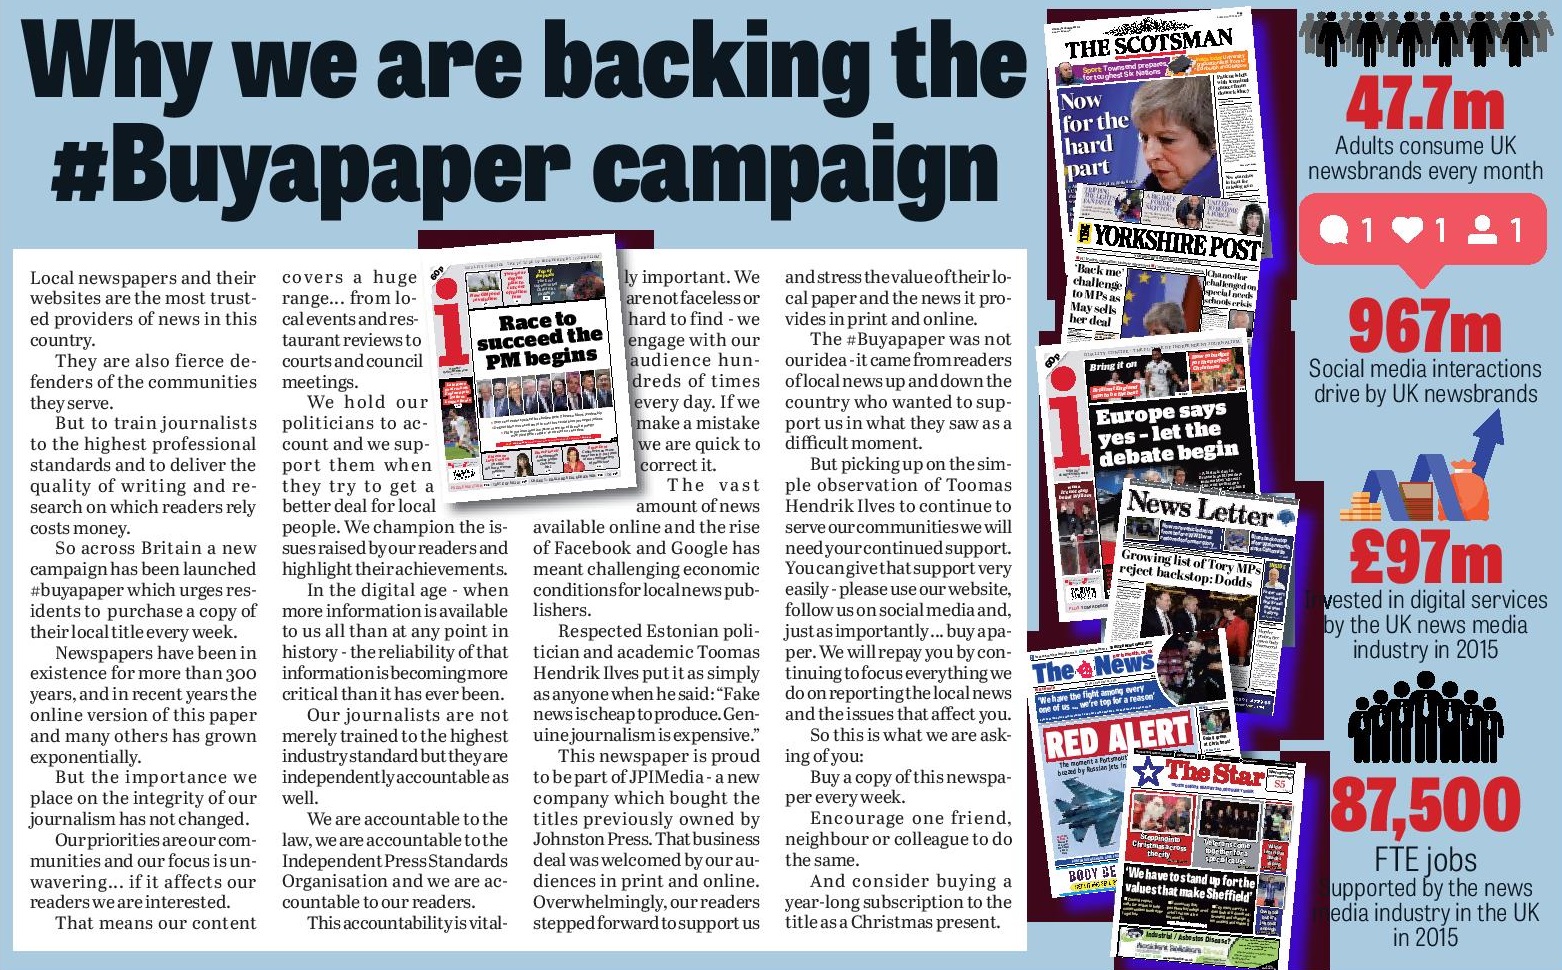 Local Publishers Urge Readers To #buyapaper